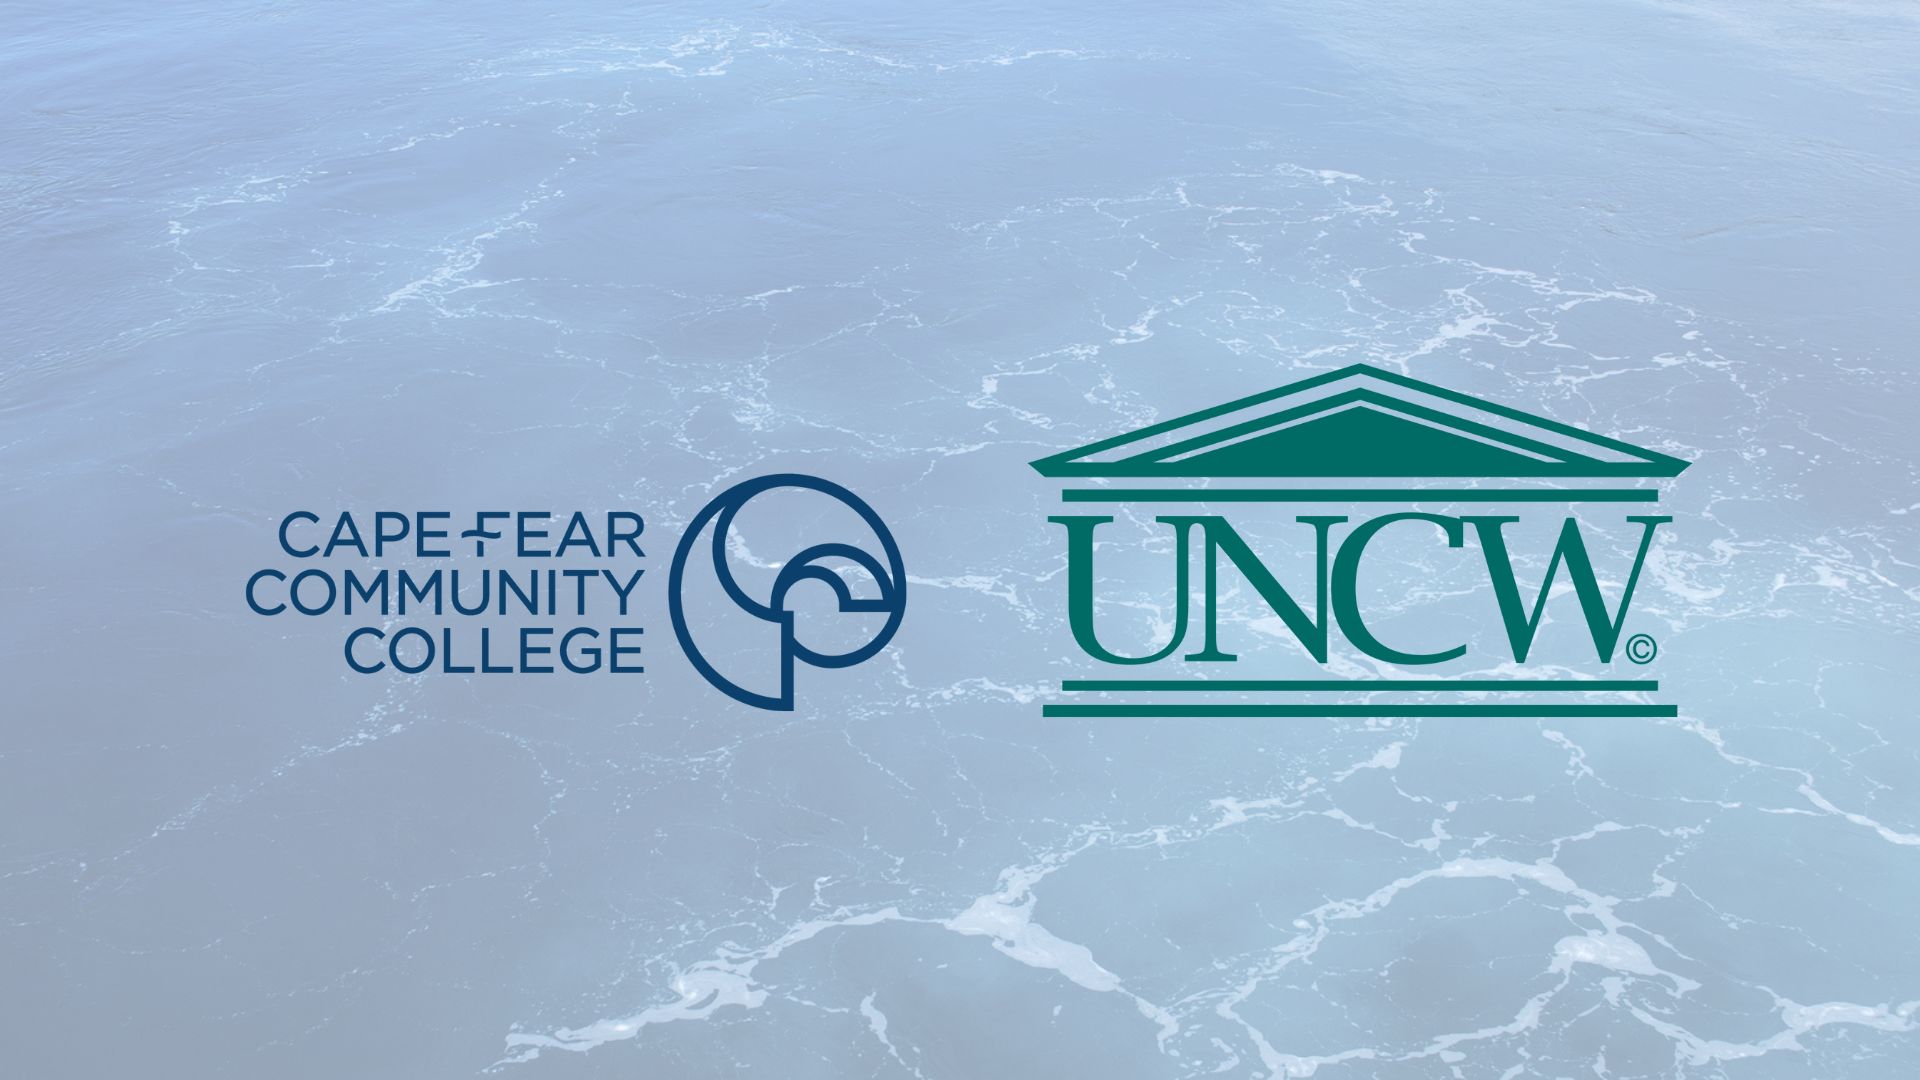 cfcc-and-uncw-establish-transfer-agreement-for-oceanography-cape-fear-community-college